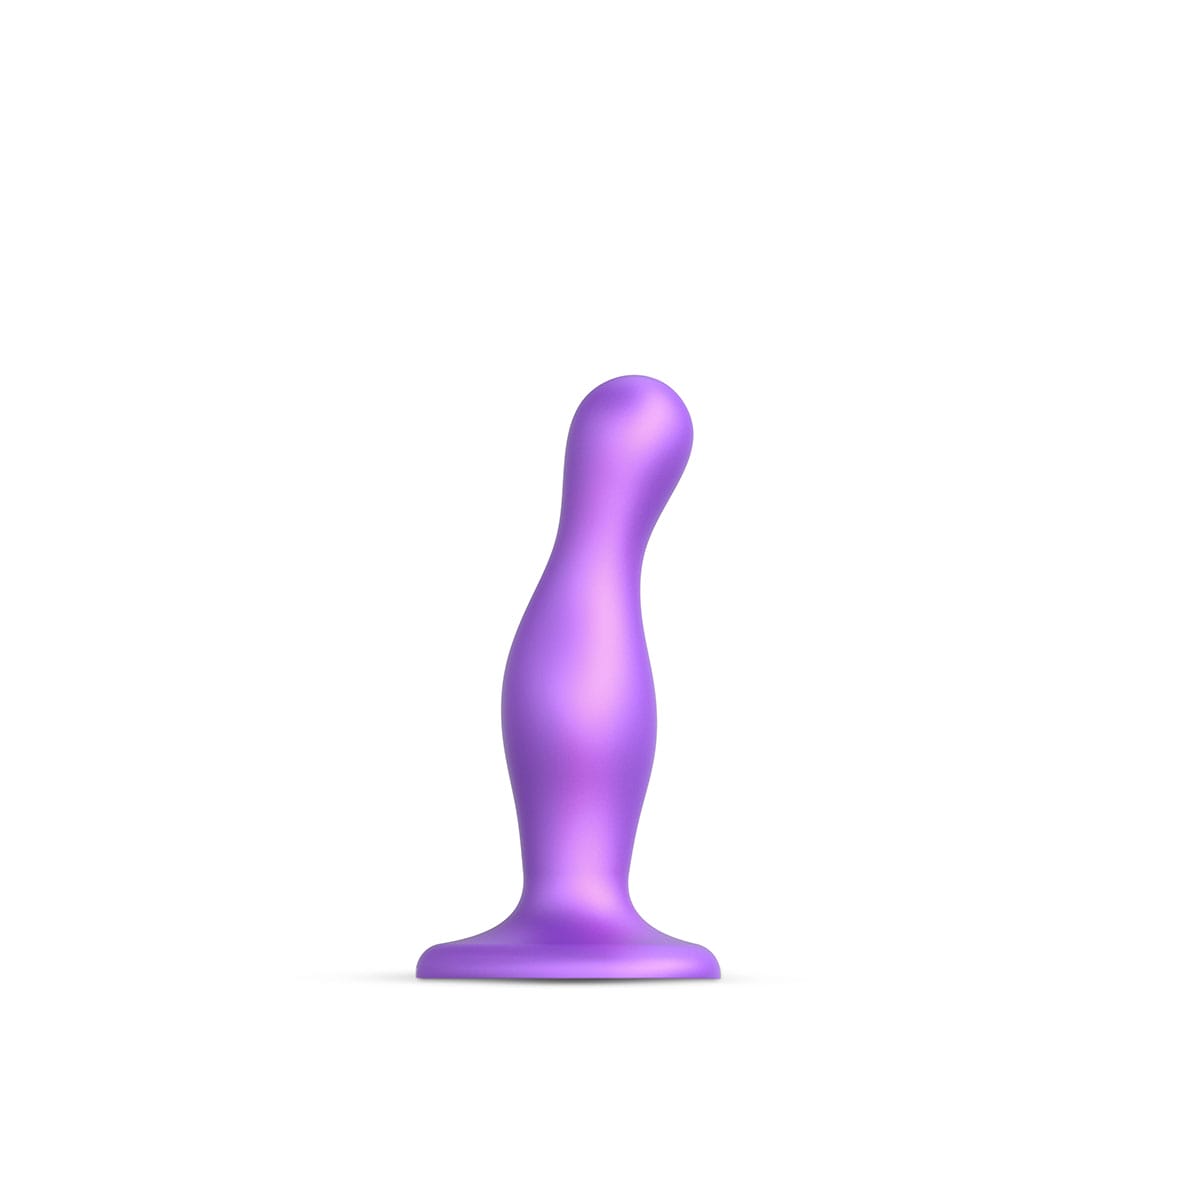 Buy Strap On Me Curvy Plug Dil Metallic Purple   Medium  long and 1.67 thick dildo made by Strap-On-Me.